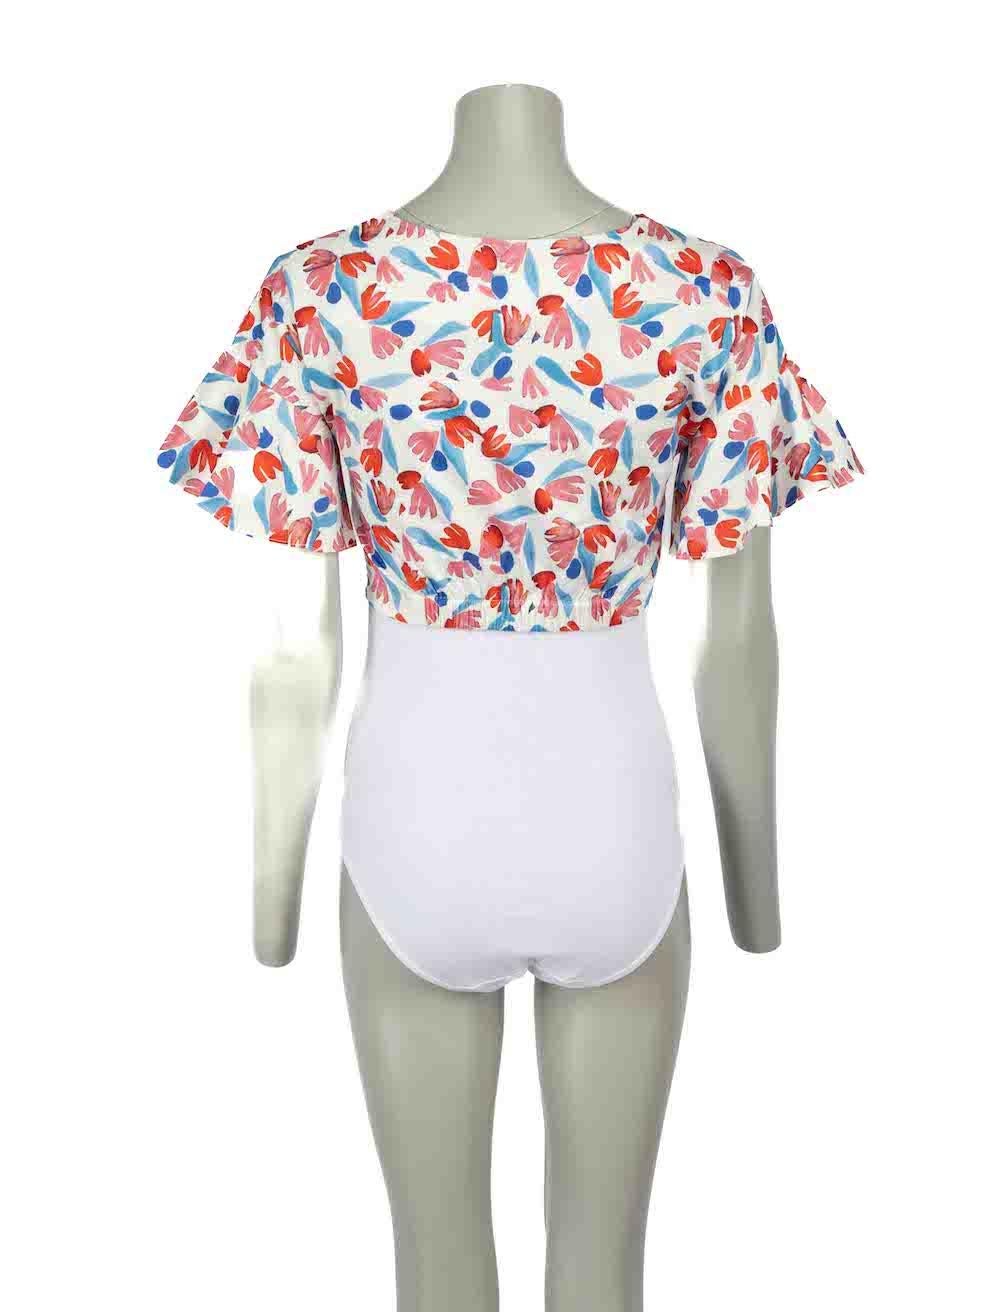 Amur Motif Pattern Short Sleeve Crop Top Size XS In Good Condition For Sale In London, GB